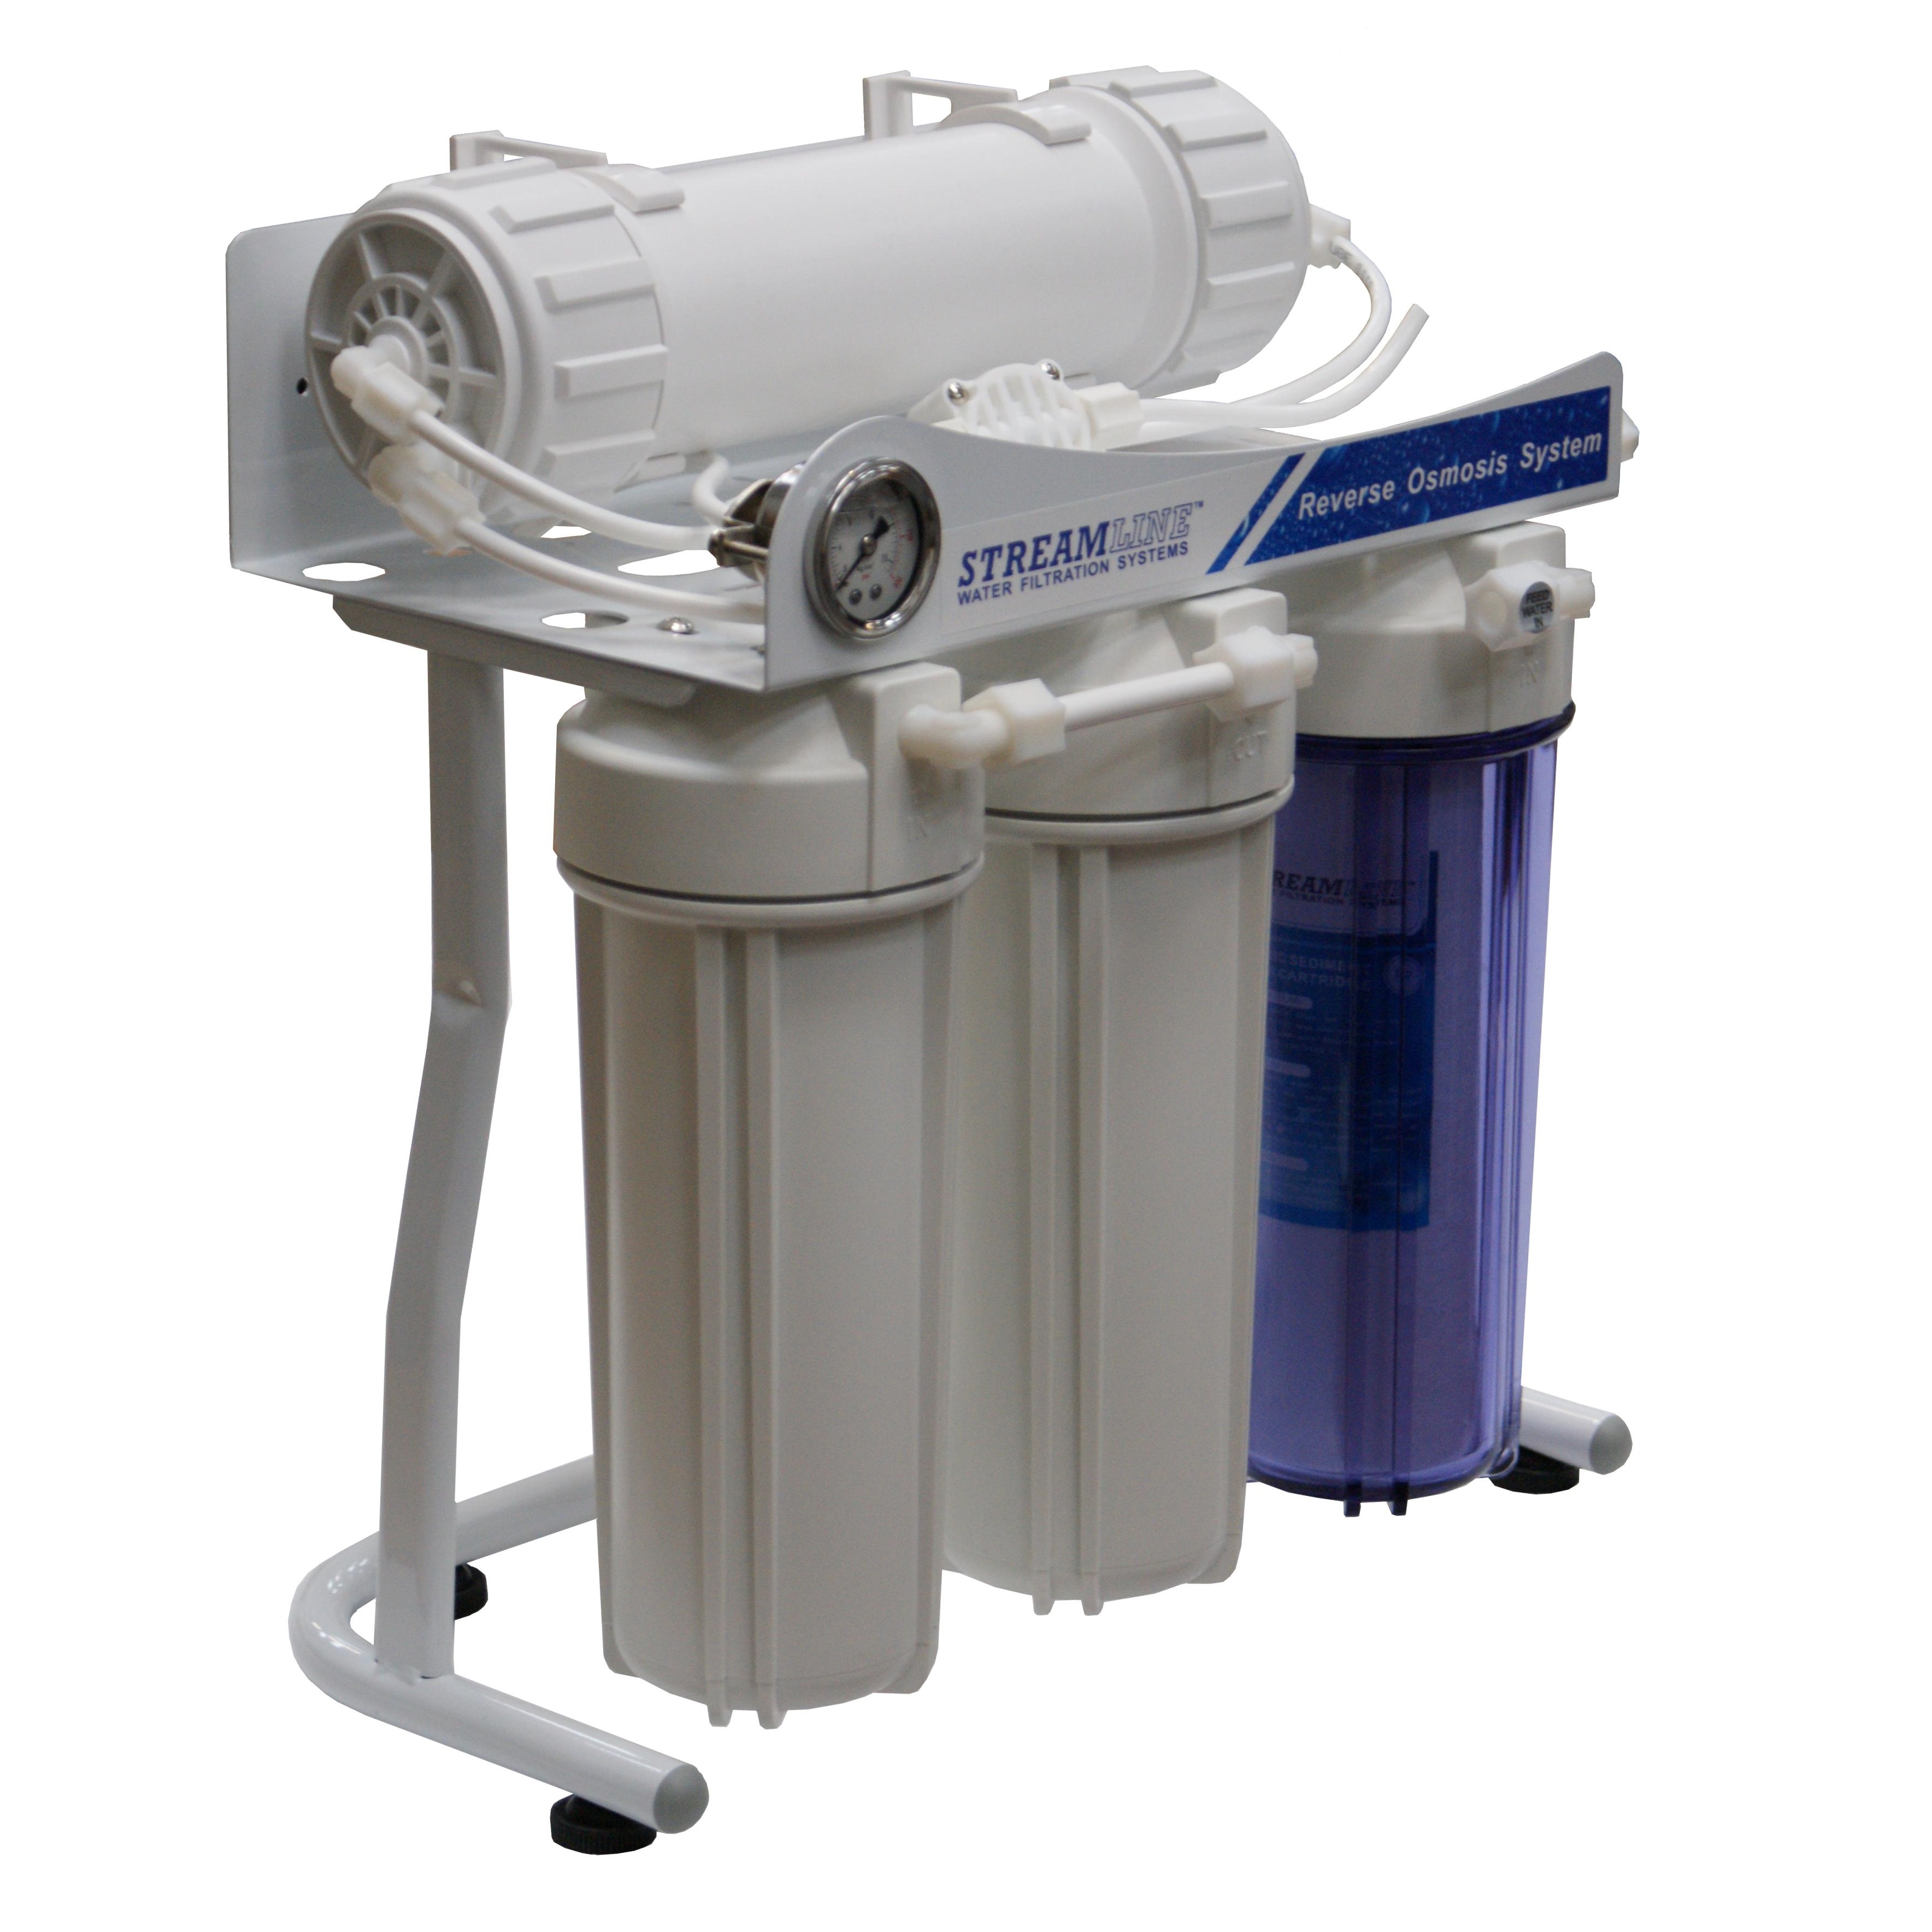 Filterplus-300-reverse-osmosis-water-filtration-system